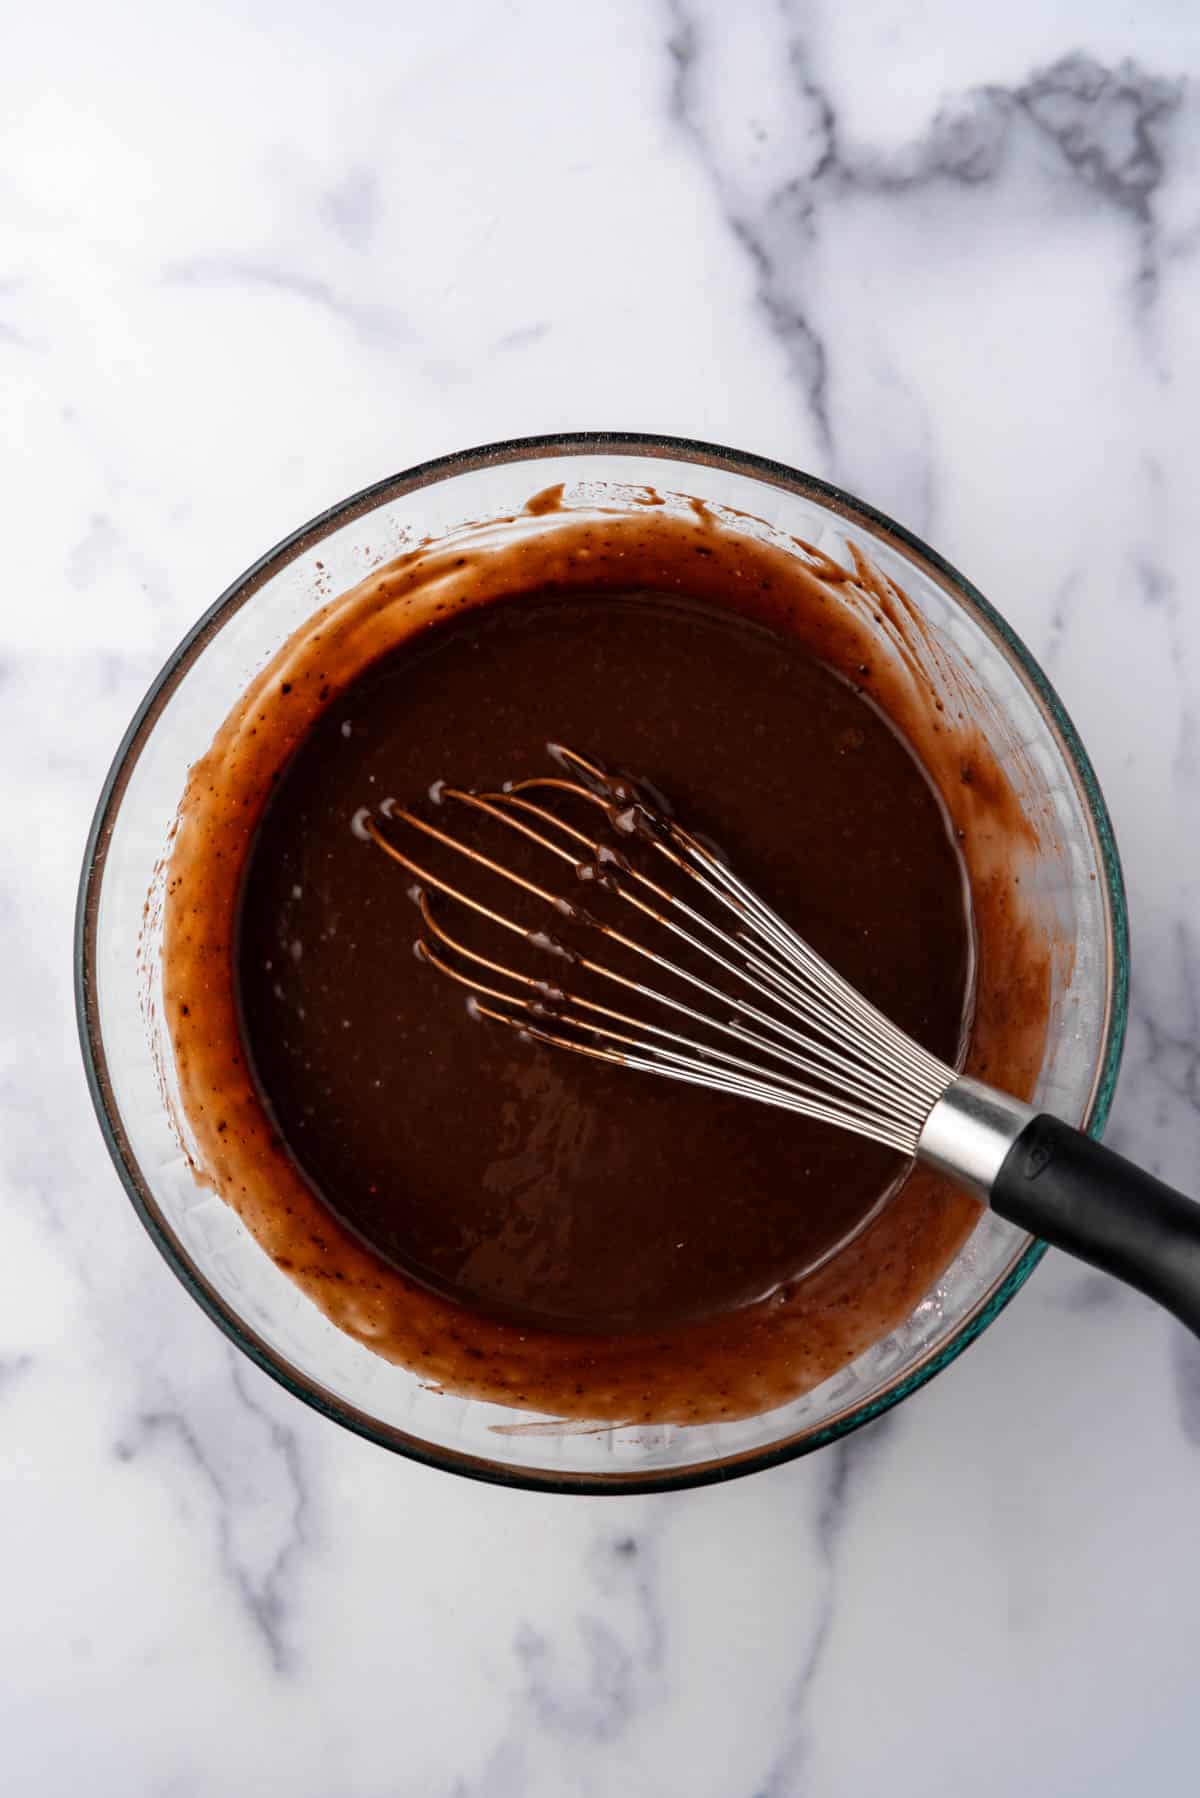 Chocolate pudding in a bowl with a whisk.